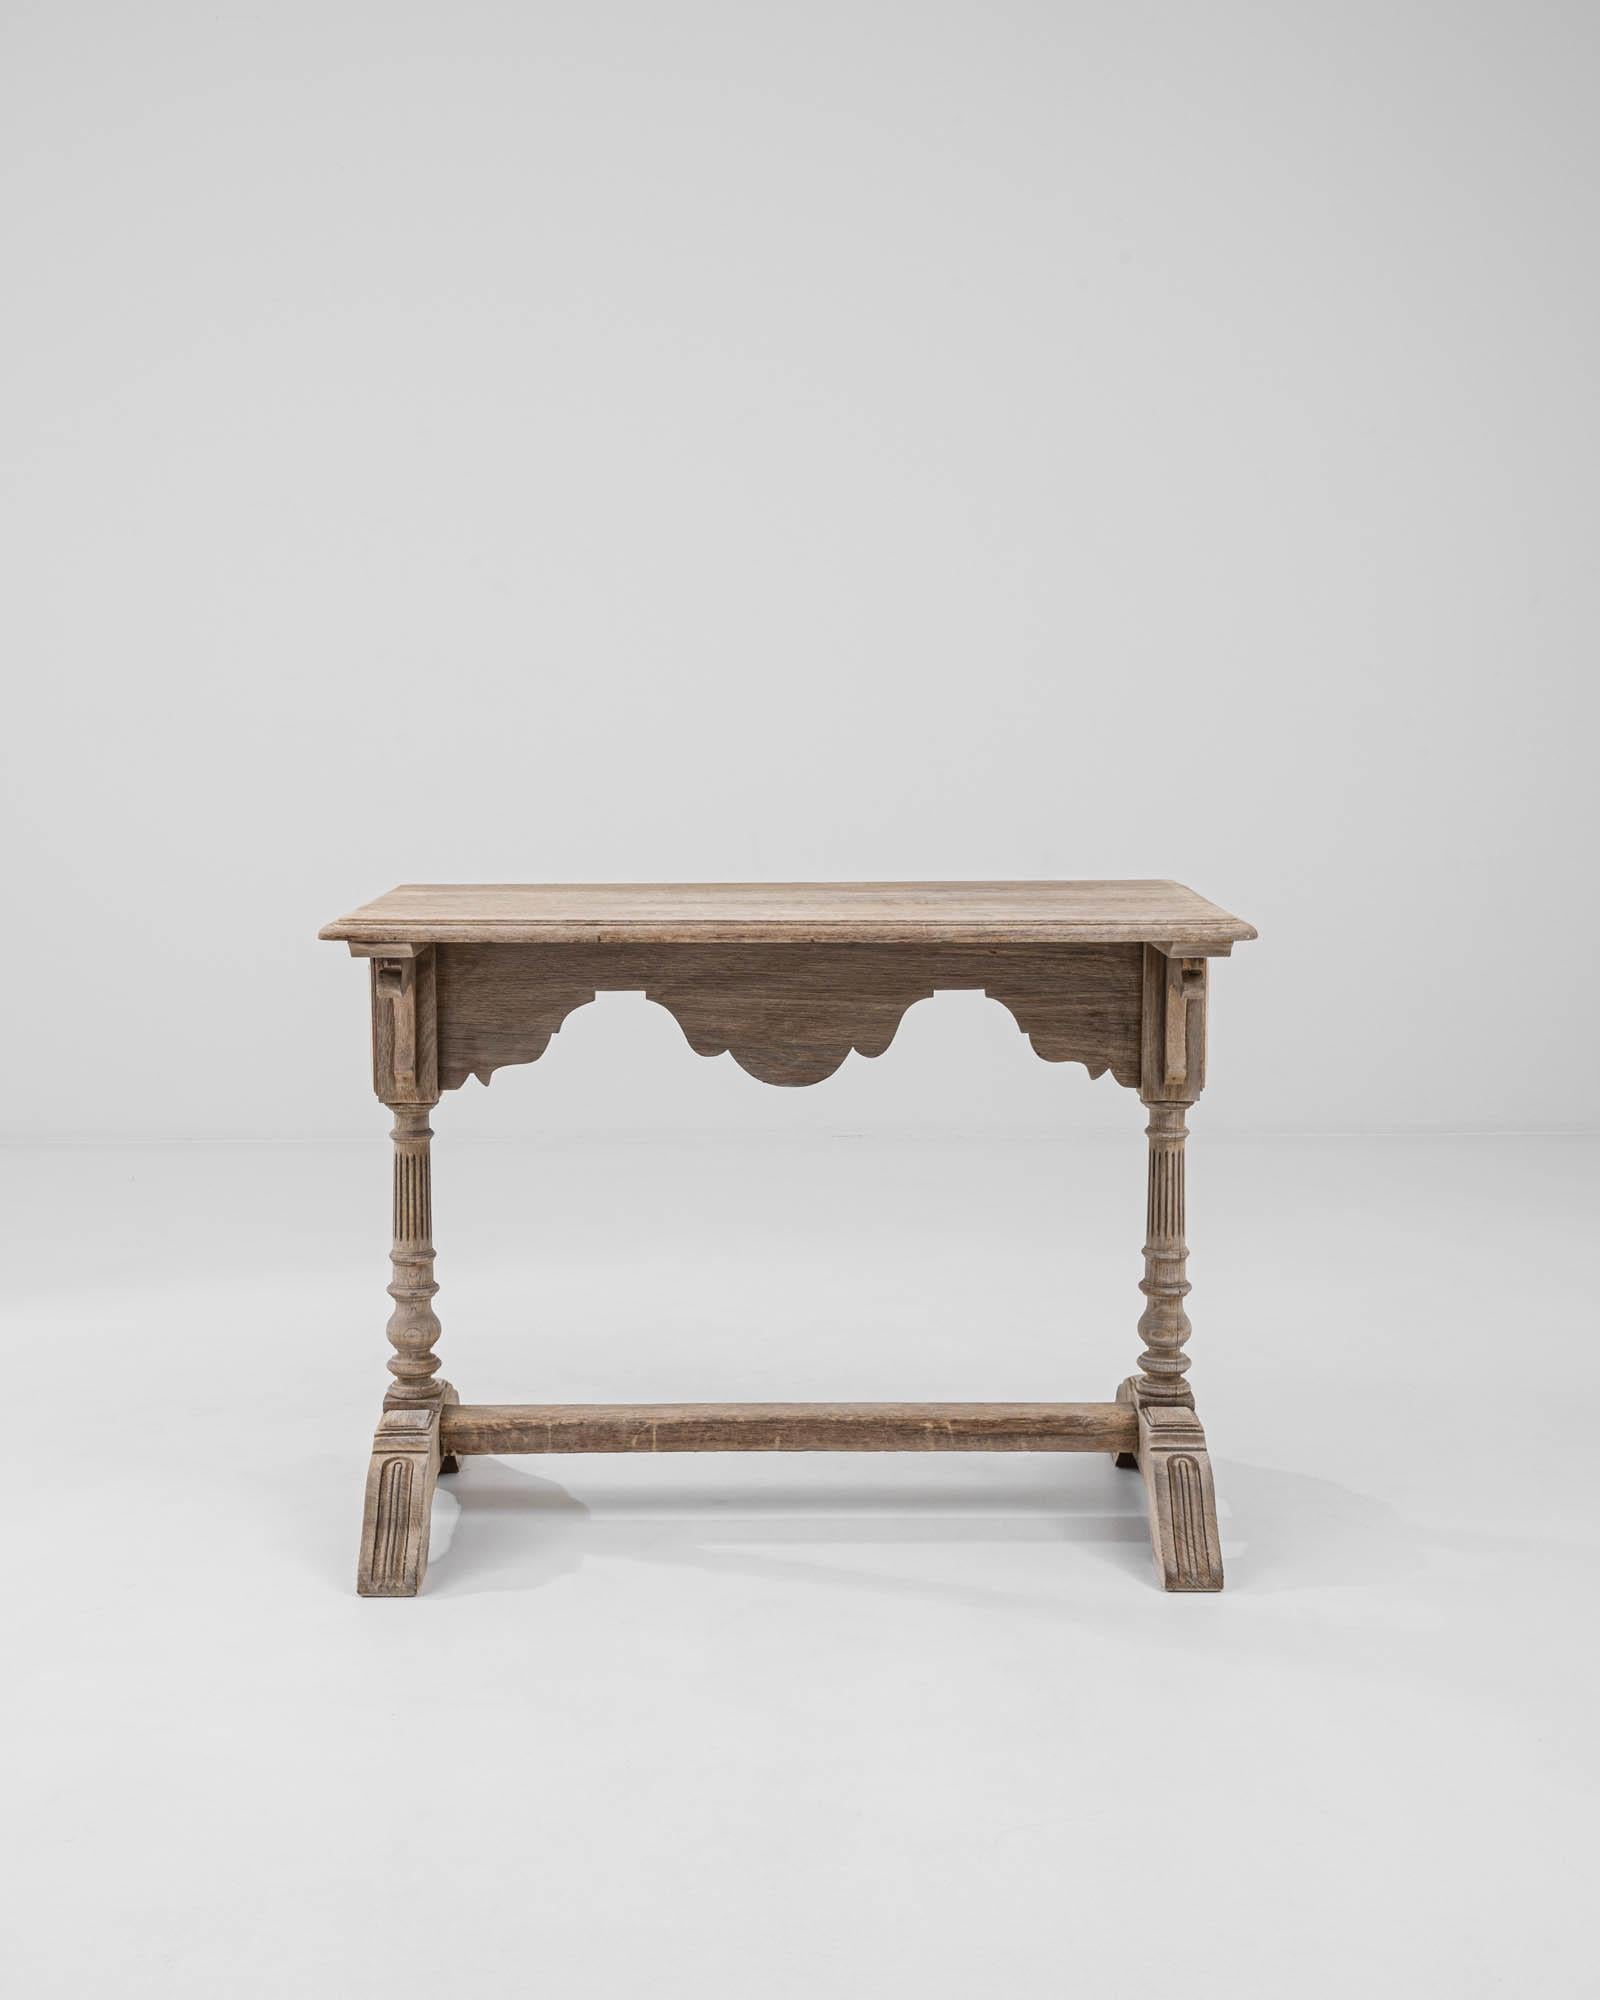 This vintage trestle table in natural oak cuts an elegant silhouette. Made in France at the turn of the century, the design combines styles and decorative techniques from a variety of eras into a light and harmonious composition. The trestle form,